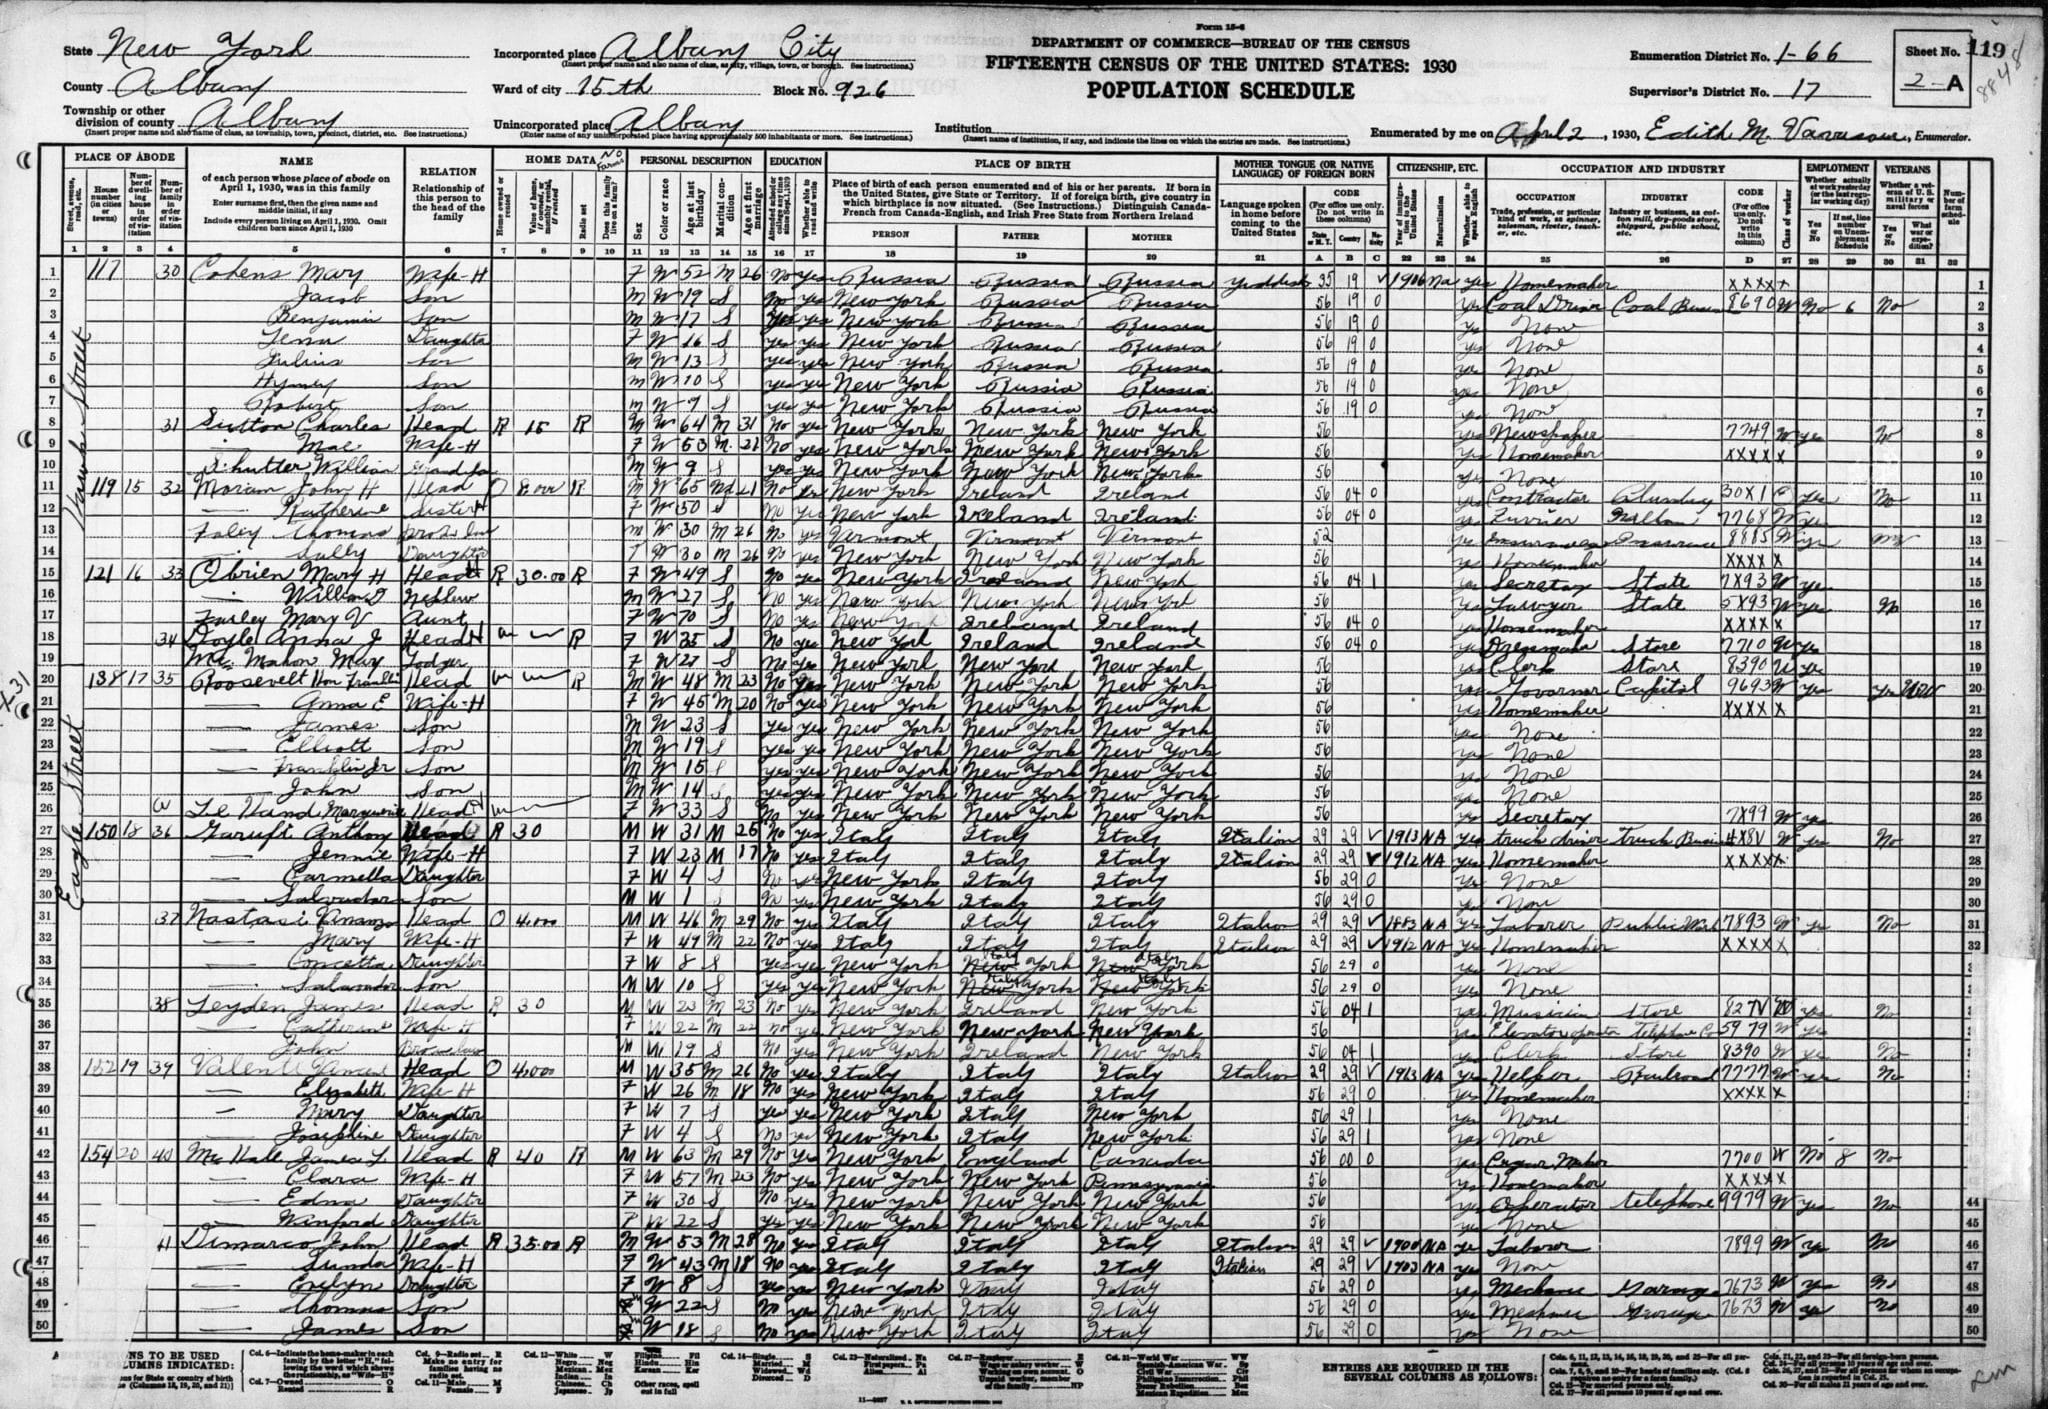 1930 U.S. Census record of FDR [Credit: MyHeritage 1930 United States Federal Census]